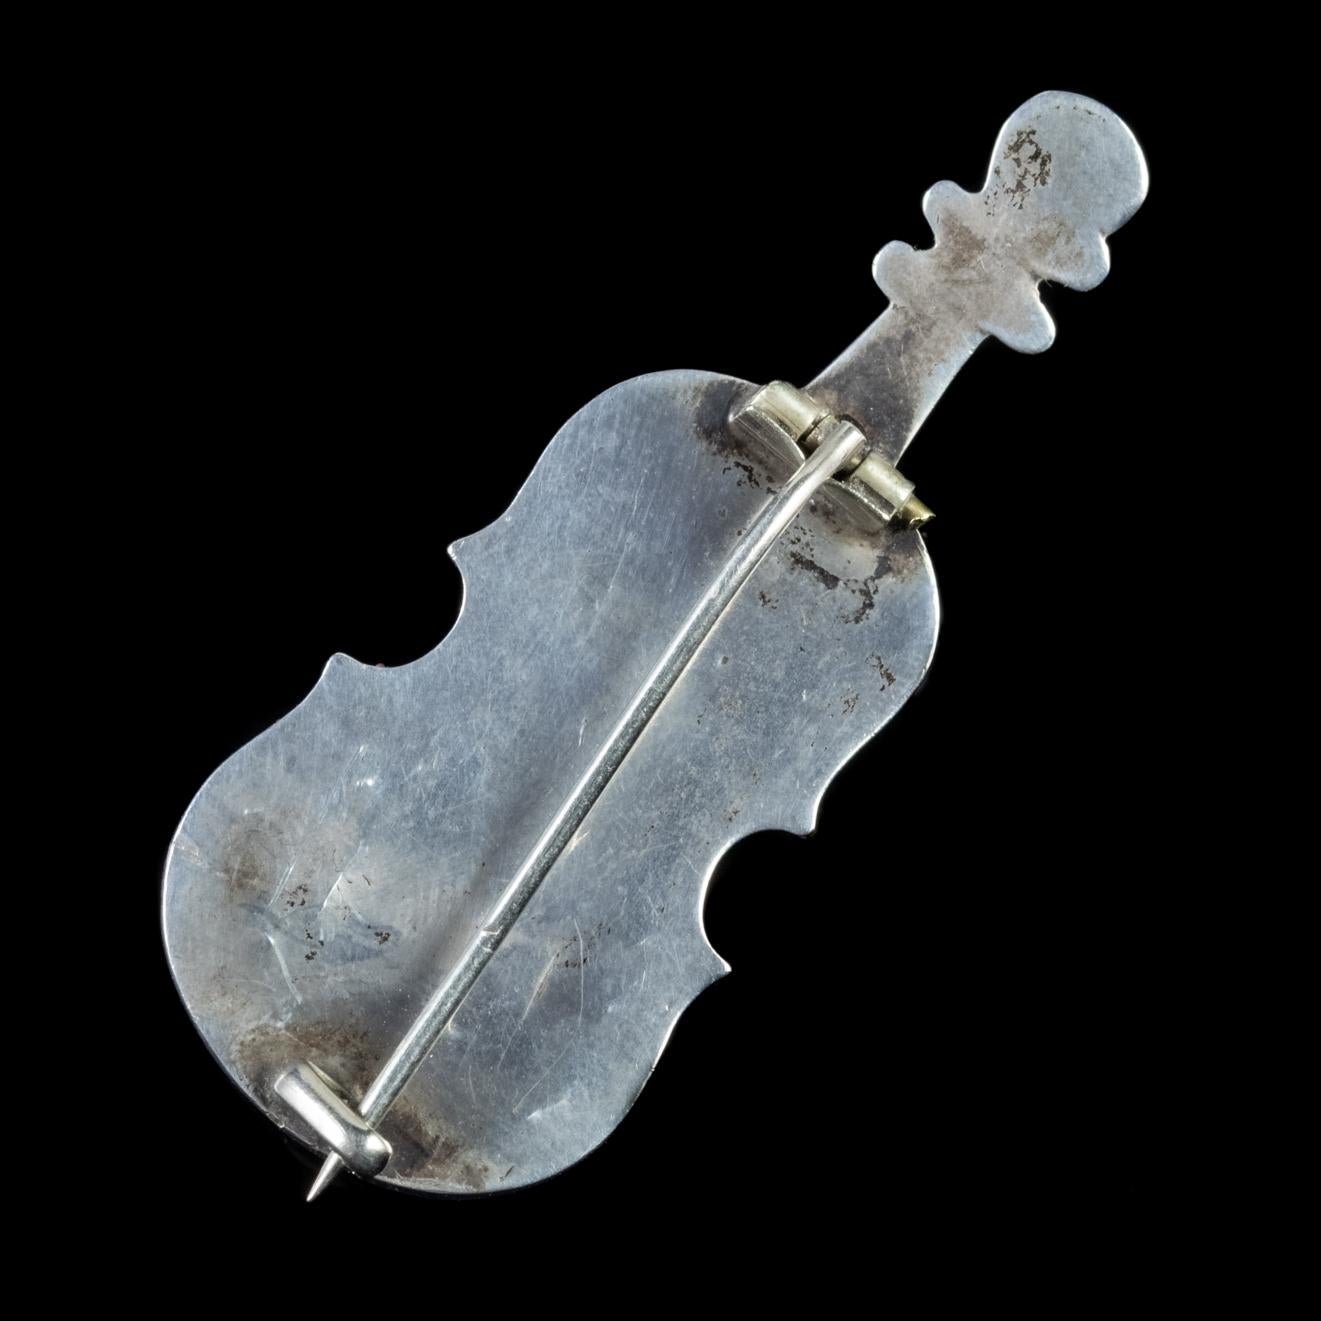 This beautiful antique Scottish Victorian brooch is carved in the likeness of a cello, with four pieces of Scottish Agate set into the top and base of the instrument. The cello’s body has been sculpted in Sterling Silver delicately engraved with